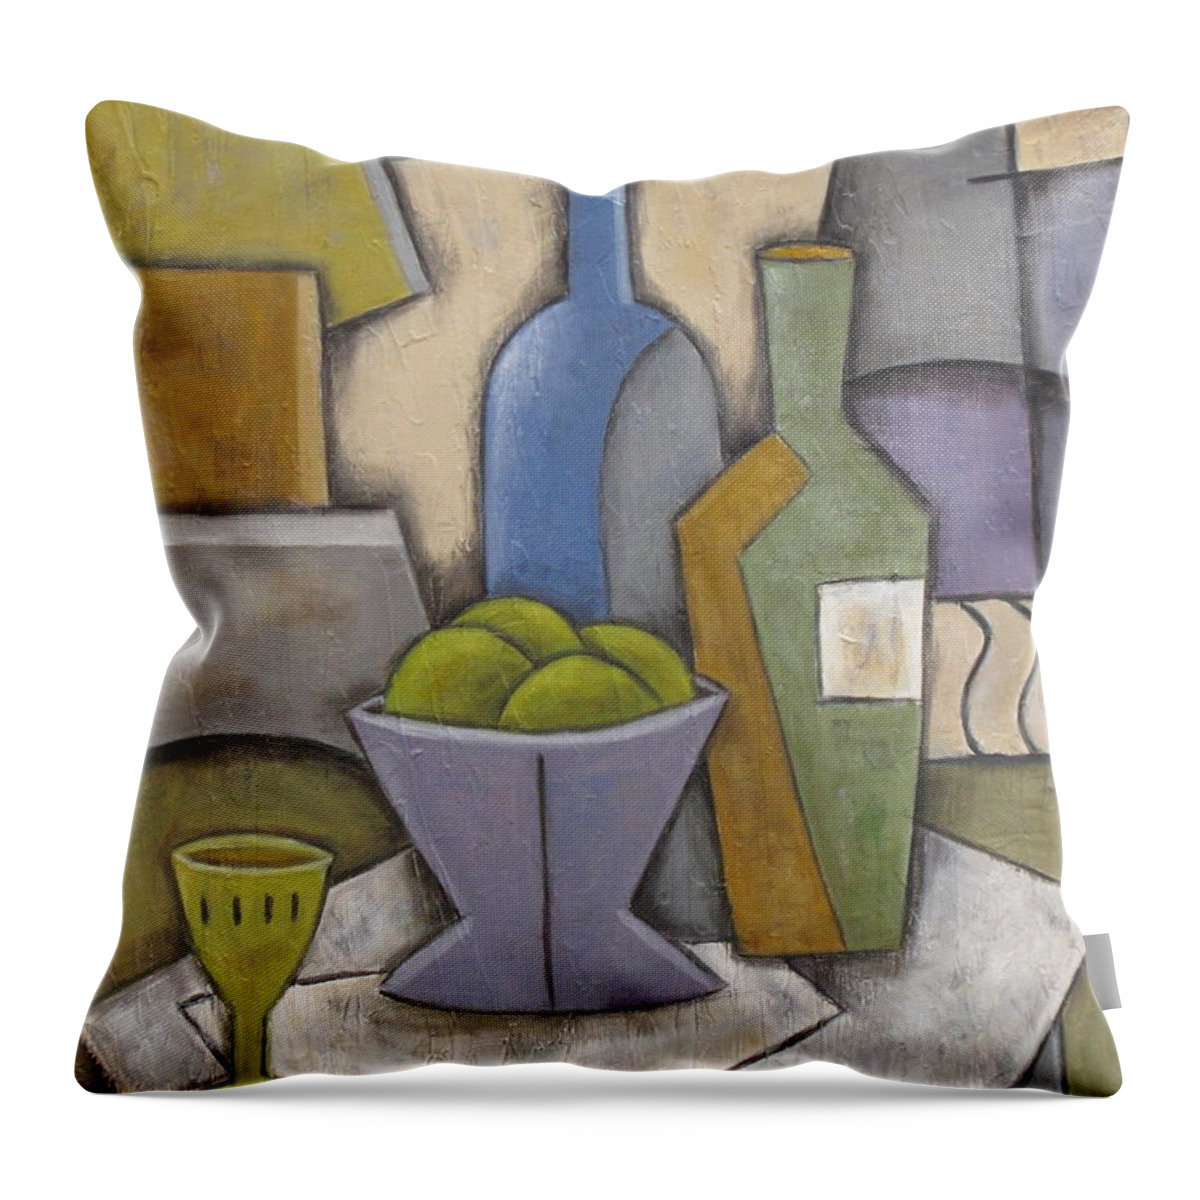 Still Life Throw Pillow featuring the painting After Hours by Trish Toro